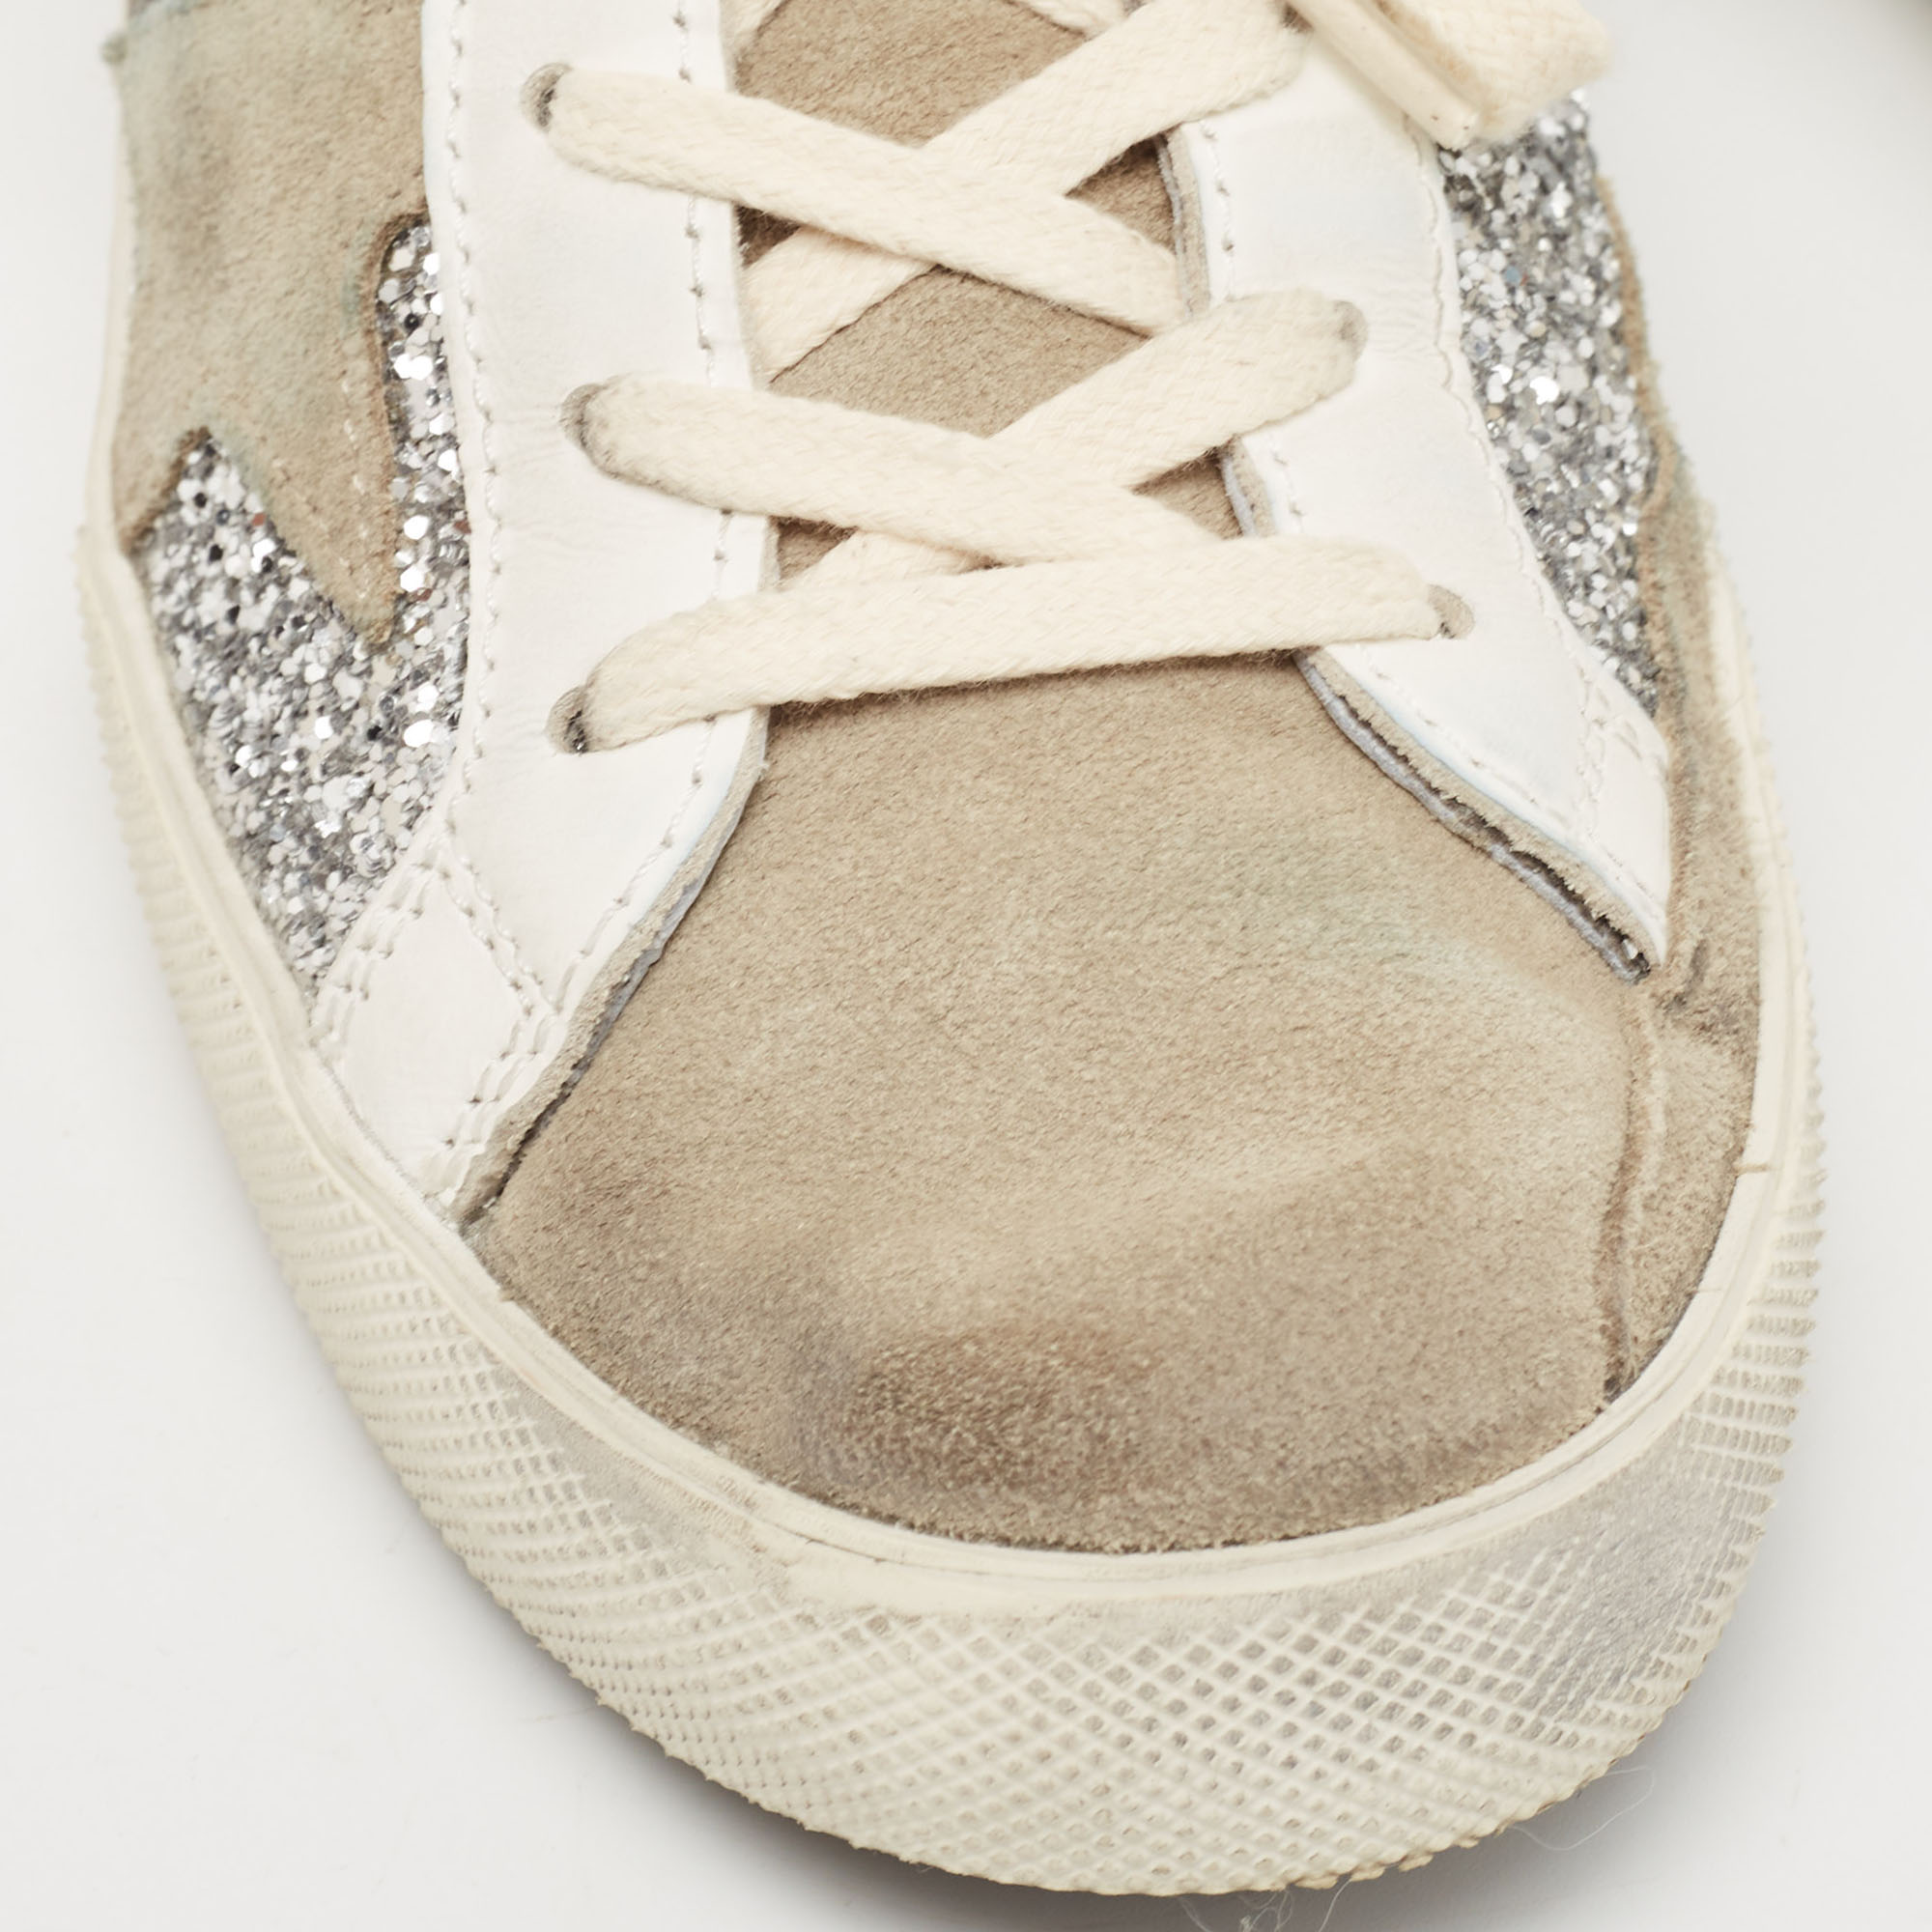 Golden Goose White/Grey Suede And Leather Superstar Sneakers Size 36